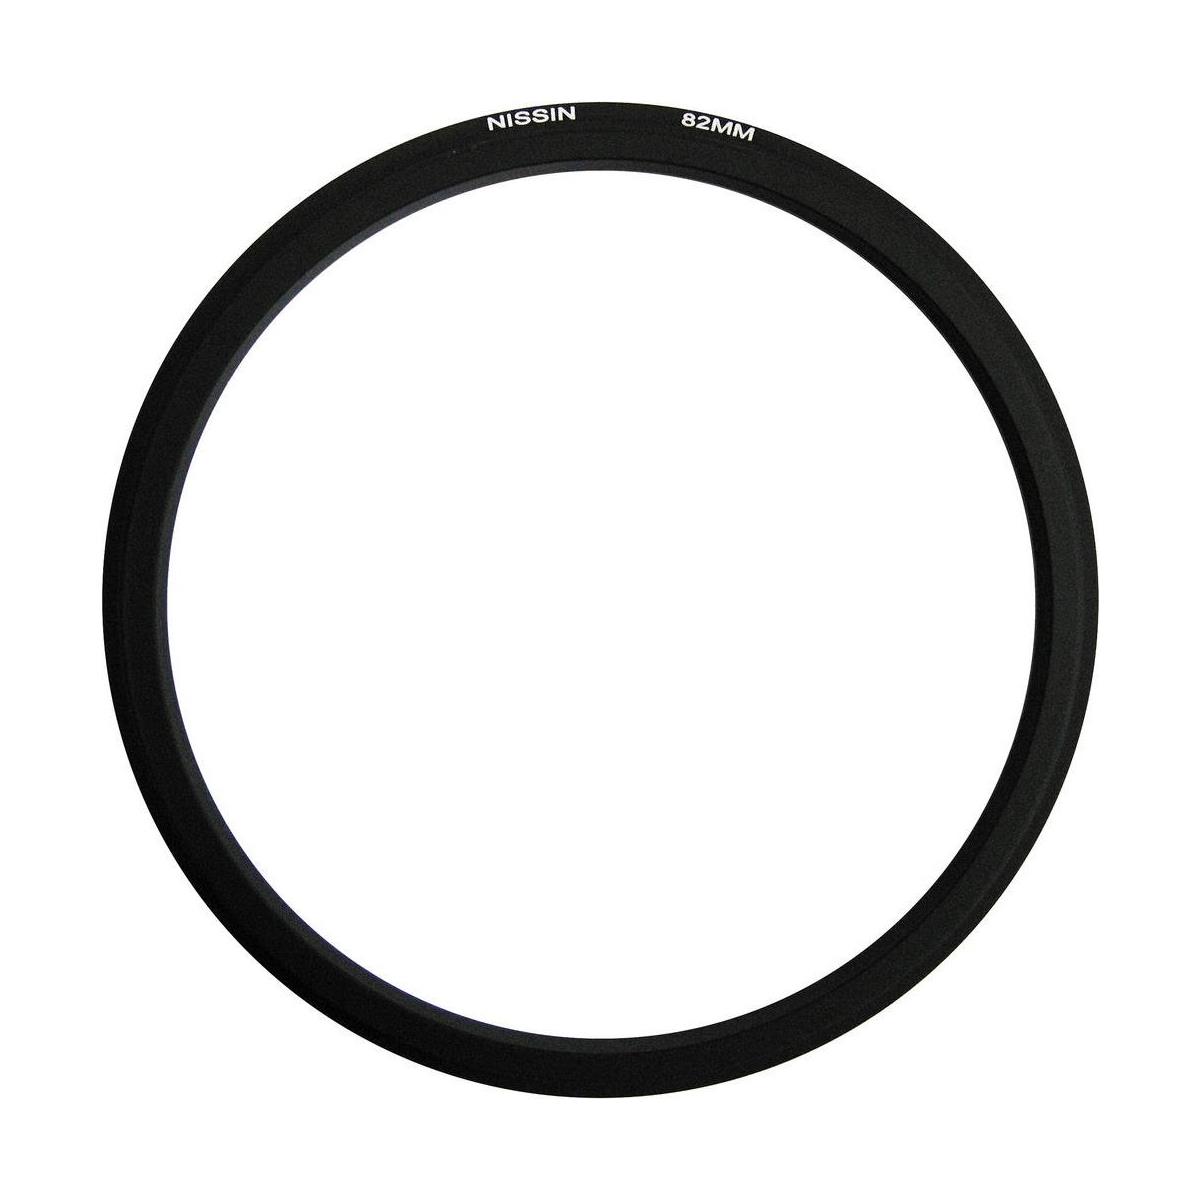 Image of Nissin 82mm Adapter Ring for MF 18 Flash